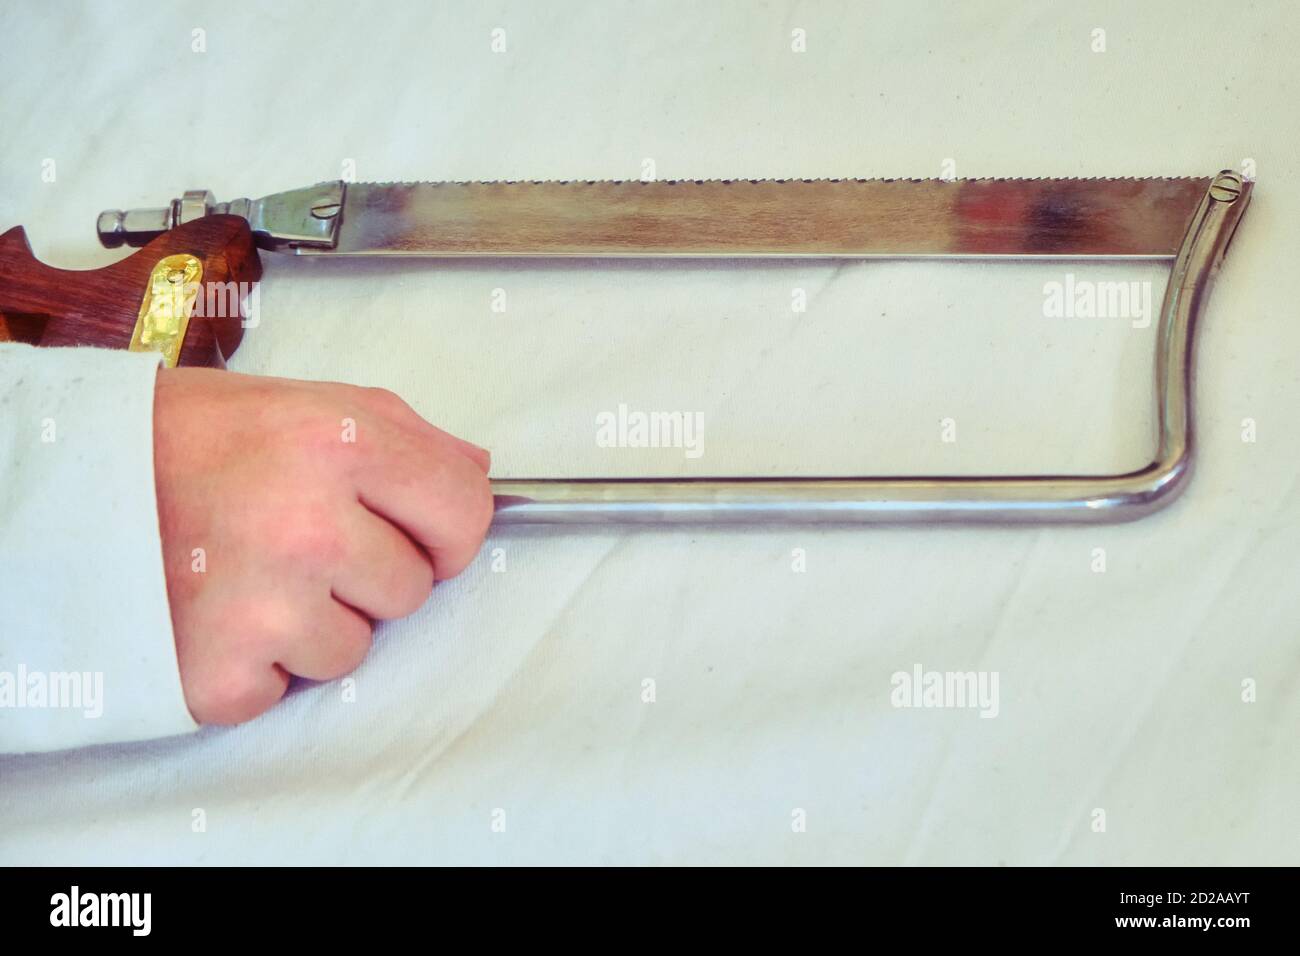 Retro saw for operations in the old days. Medical instrument for surgical amputations. Stock Photo